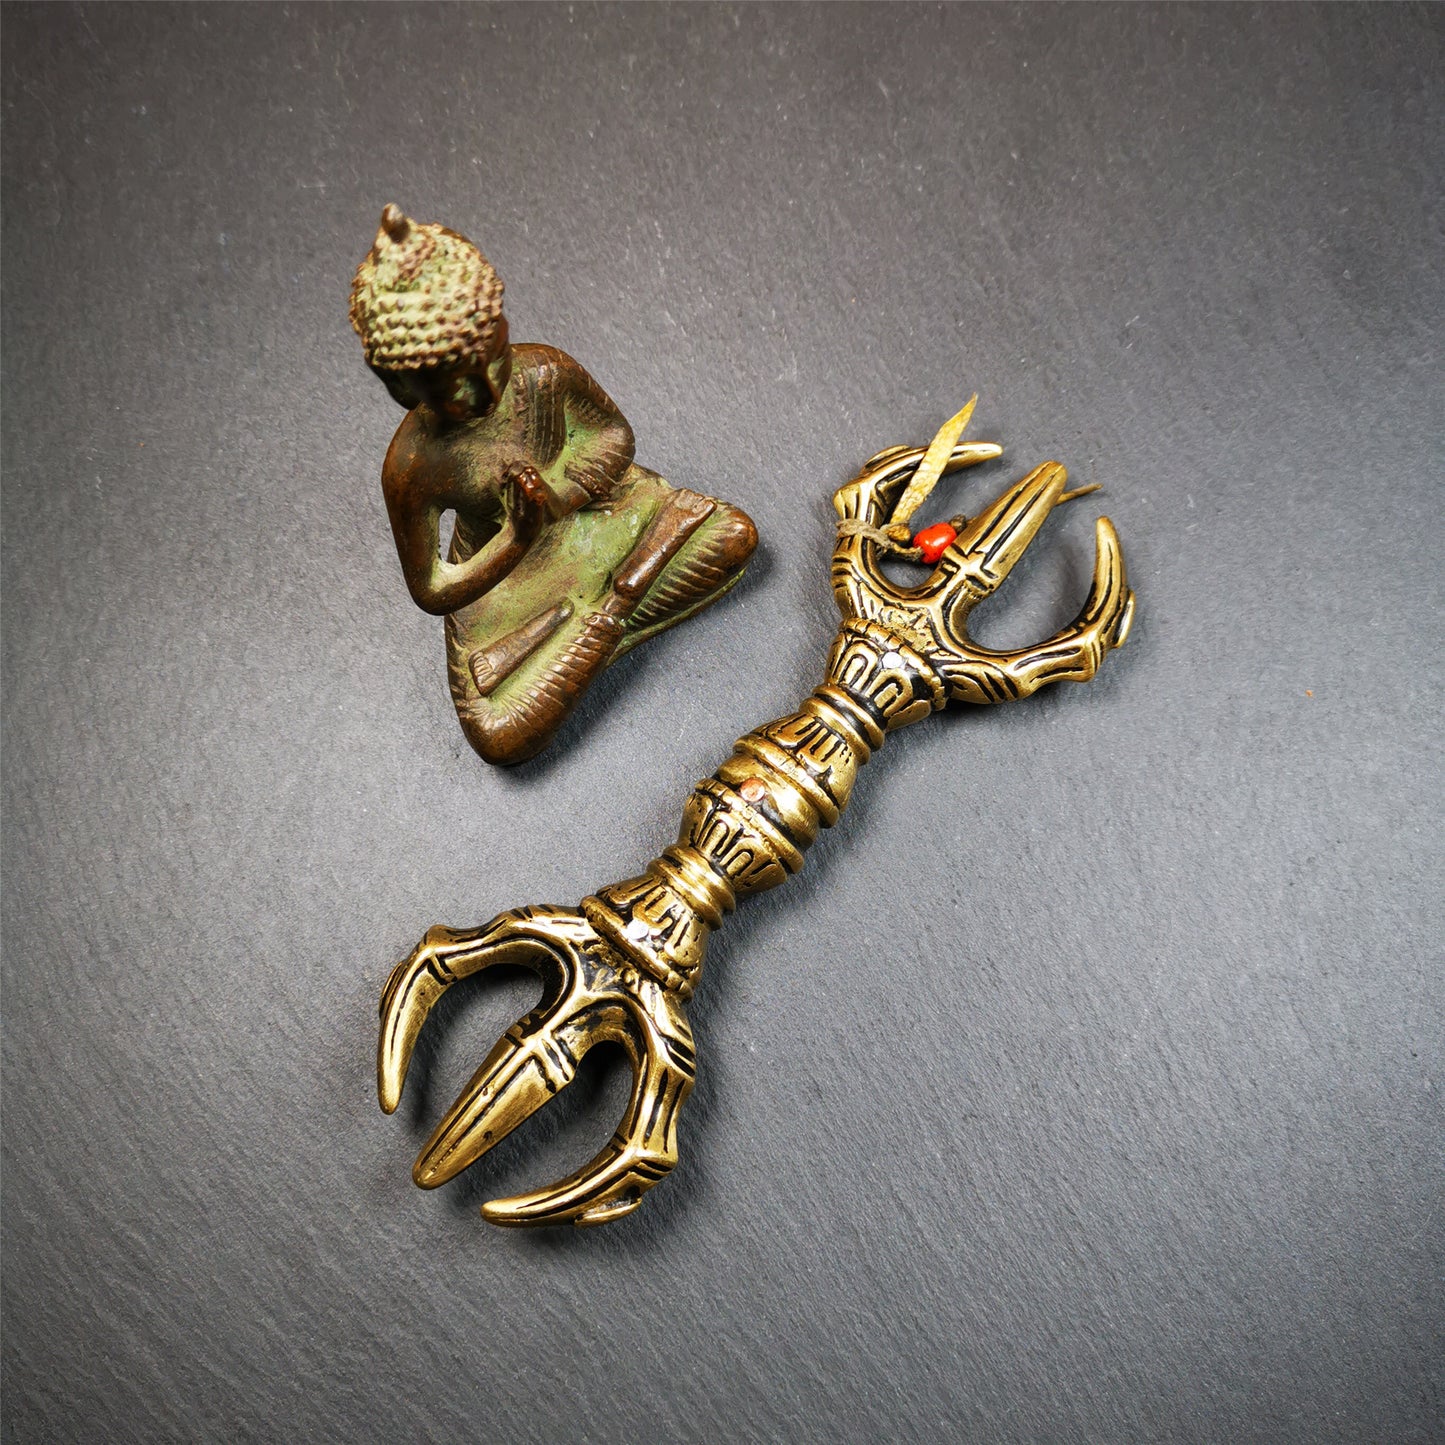 This unique vajra pendant was handmade by Tibetan craftsmen from Tibet in 2000's,from Hepo Town, Baiyu County, the birthplace of the famous Tibetan handicrafts. It is unique flat three - pronged Vajra,made of brass, yellow color,6.3 inches length. In tantric Buddhist practice, the vajra is a potent instrument with multifaceted meaning, symbolizing the adamantine state of existence of a Buddhist practitioner who has reached full enlightenment. The vajra is the archetypal symbol of tantric Buddhism.